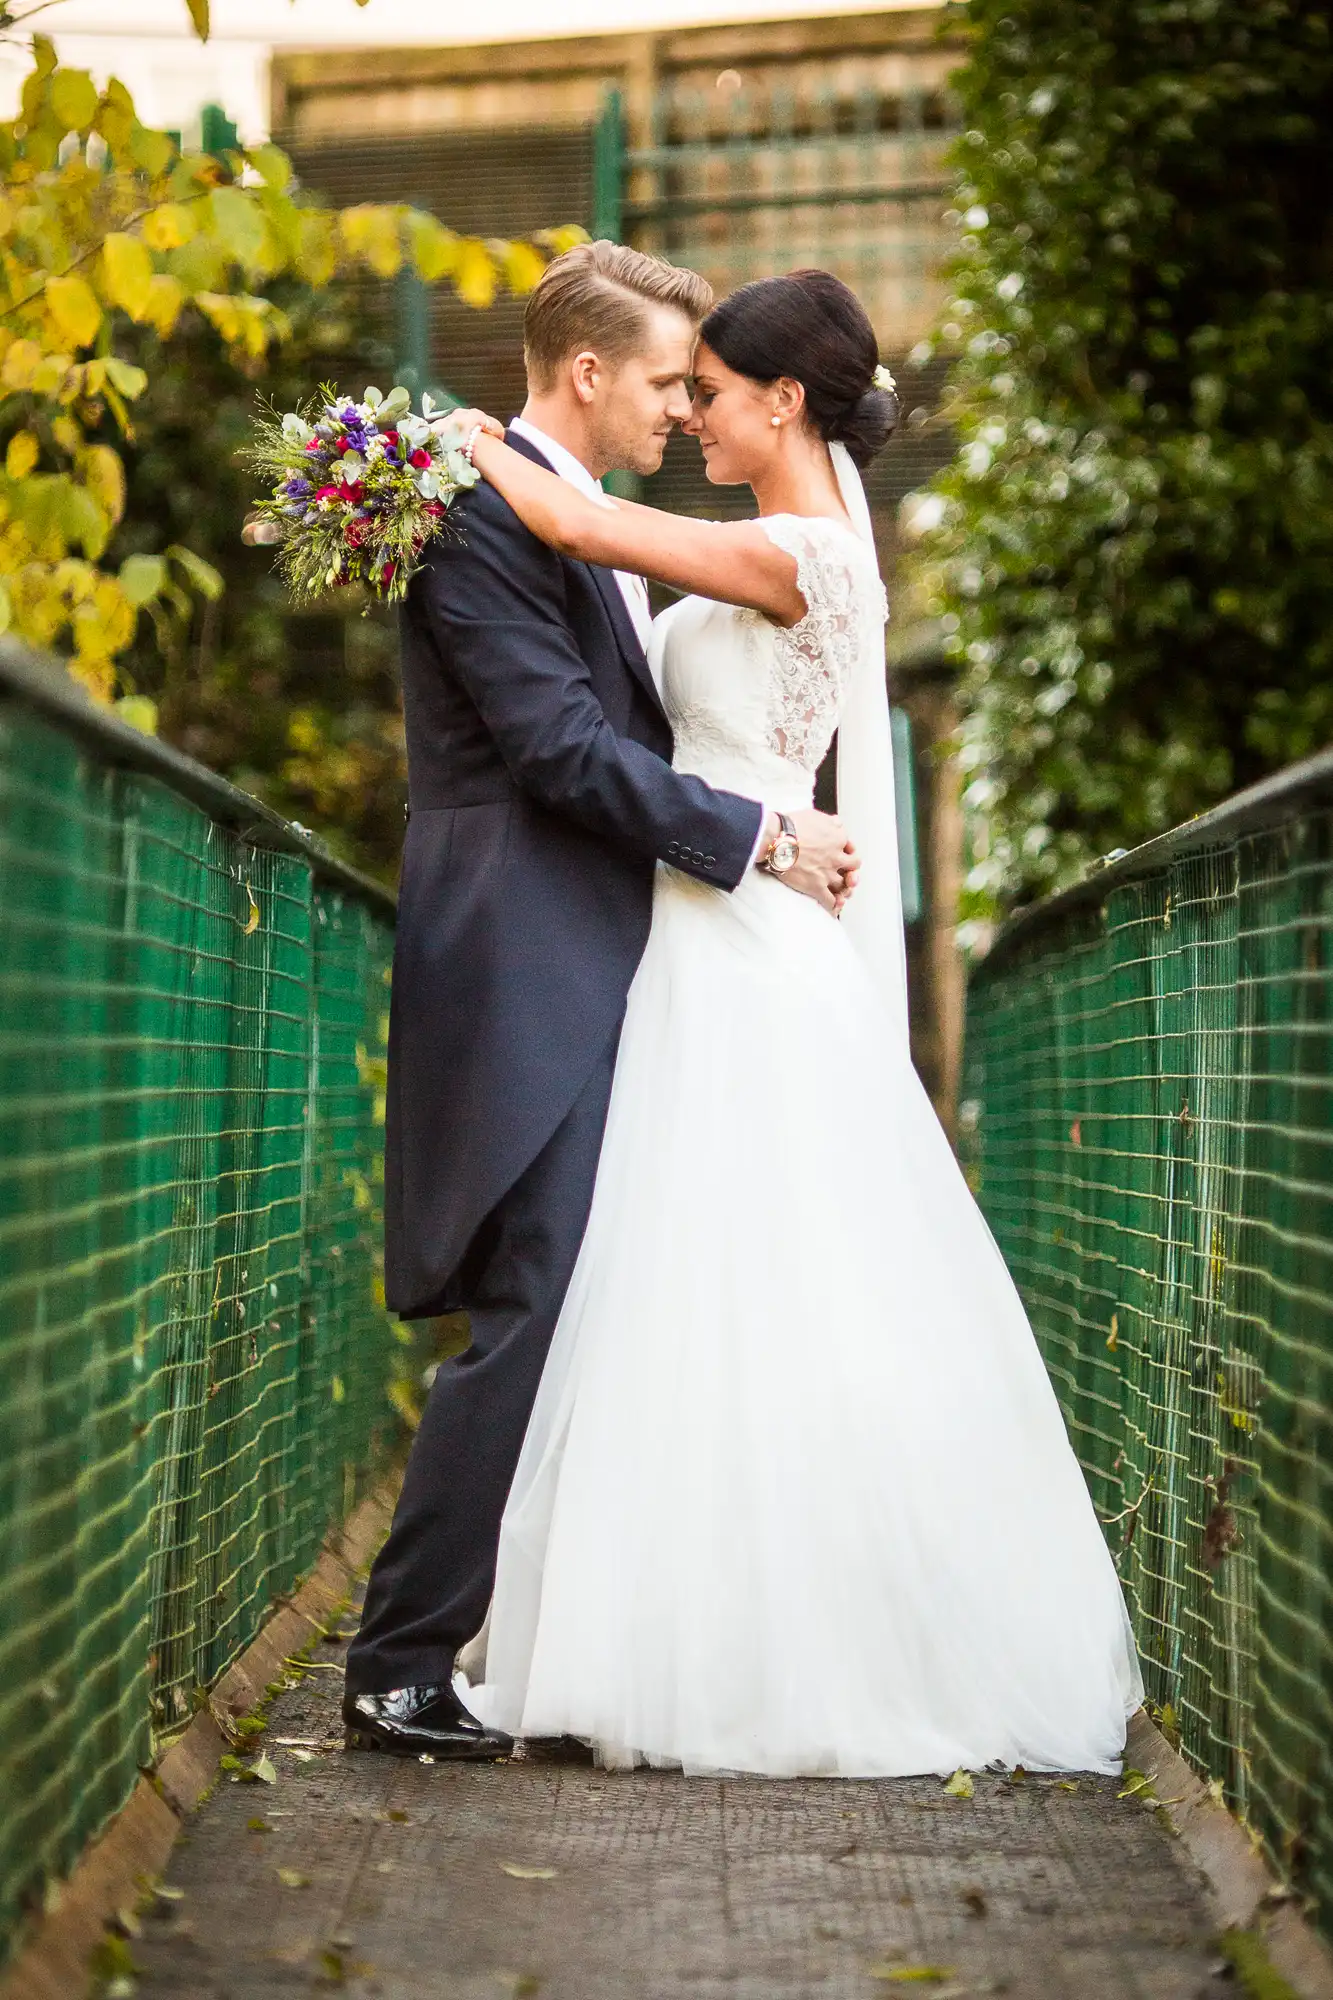 A bride and groom embrace on a narrow pathway, surrounded by green fences, the bride holding a colorful bouquet.